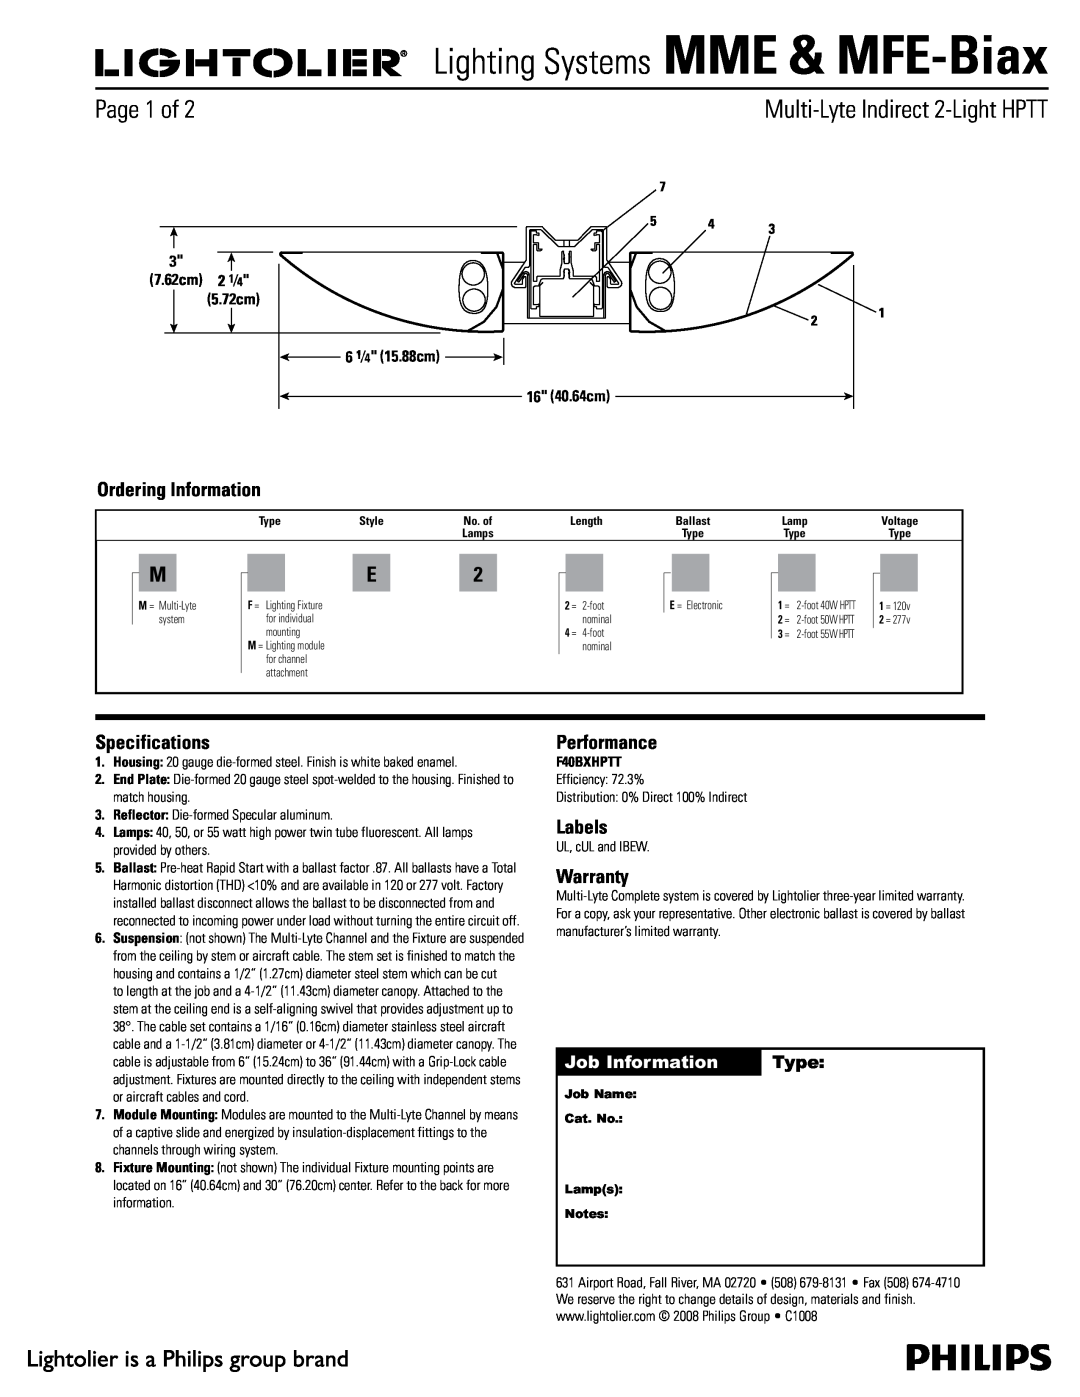 Lightolier specifications Lighting Systems MME & MFE-Biax, 1BHFPG2, Ordering Information, Specifications, Labels 